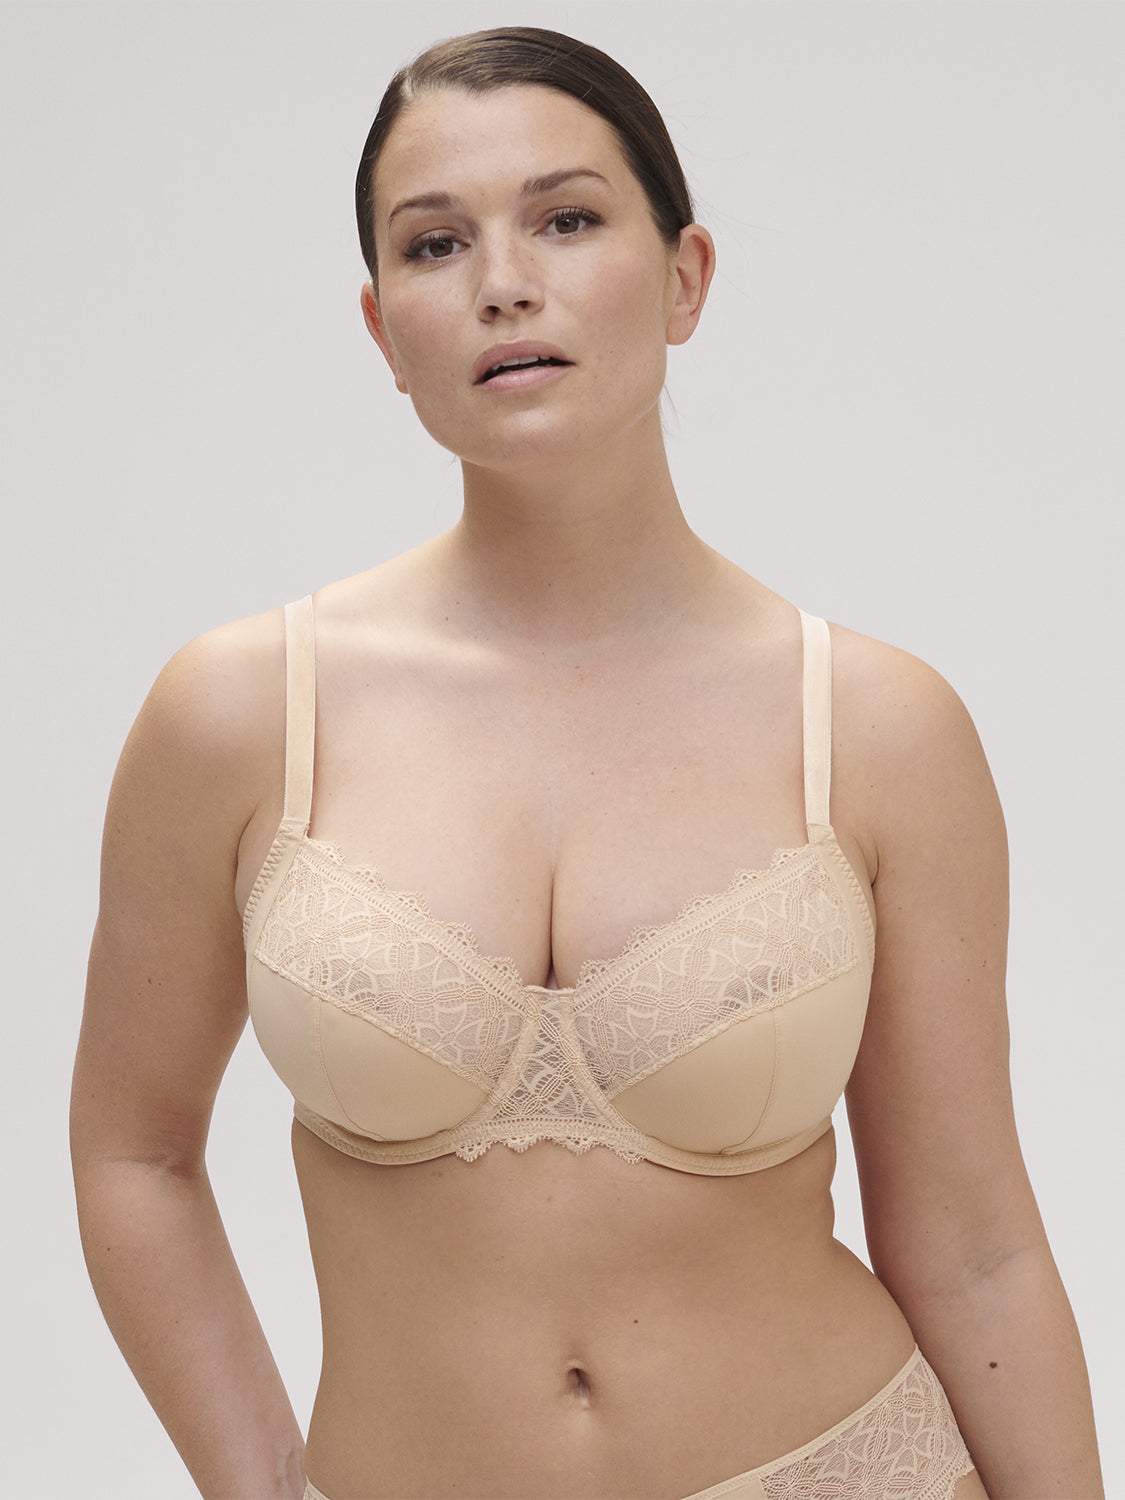 Small gap in the top part of the cups, discomfort under the armpits 70GG -  Ewa Michalak » Chp Elegance (665)